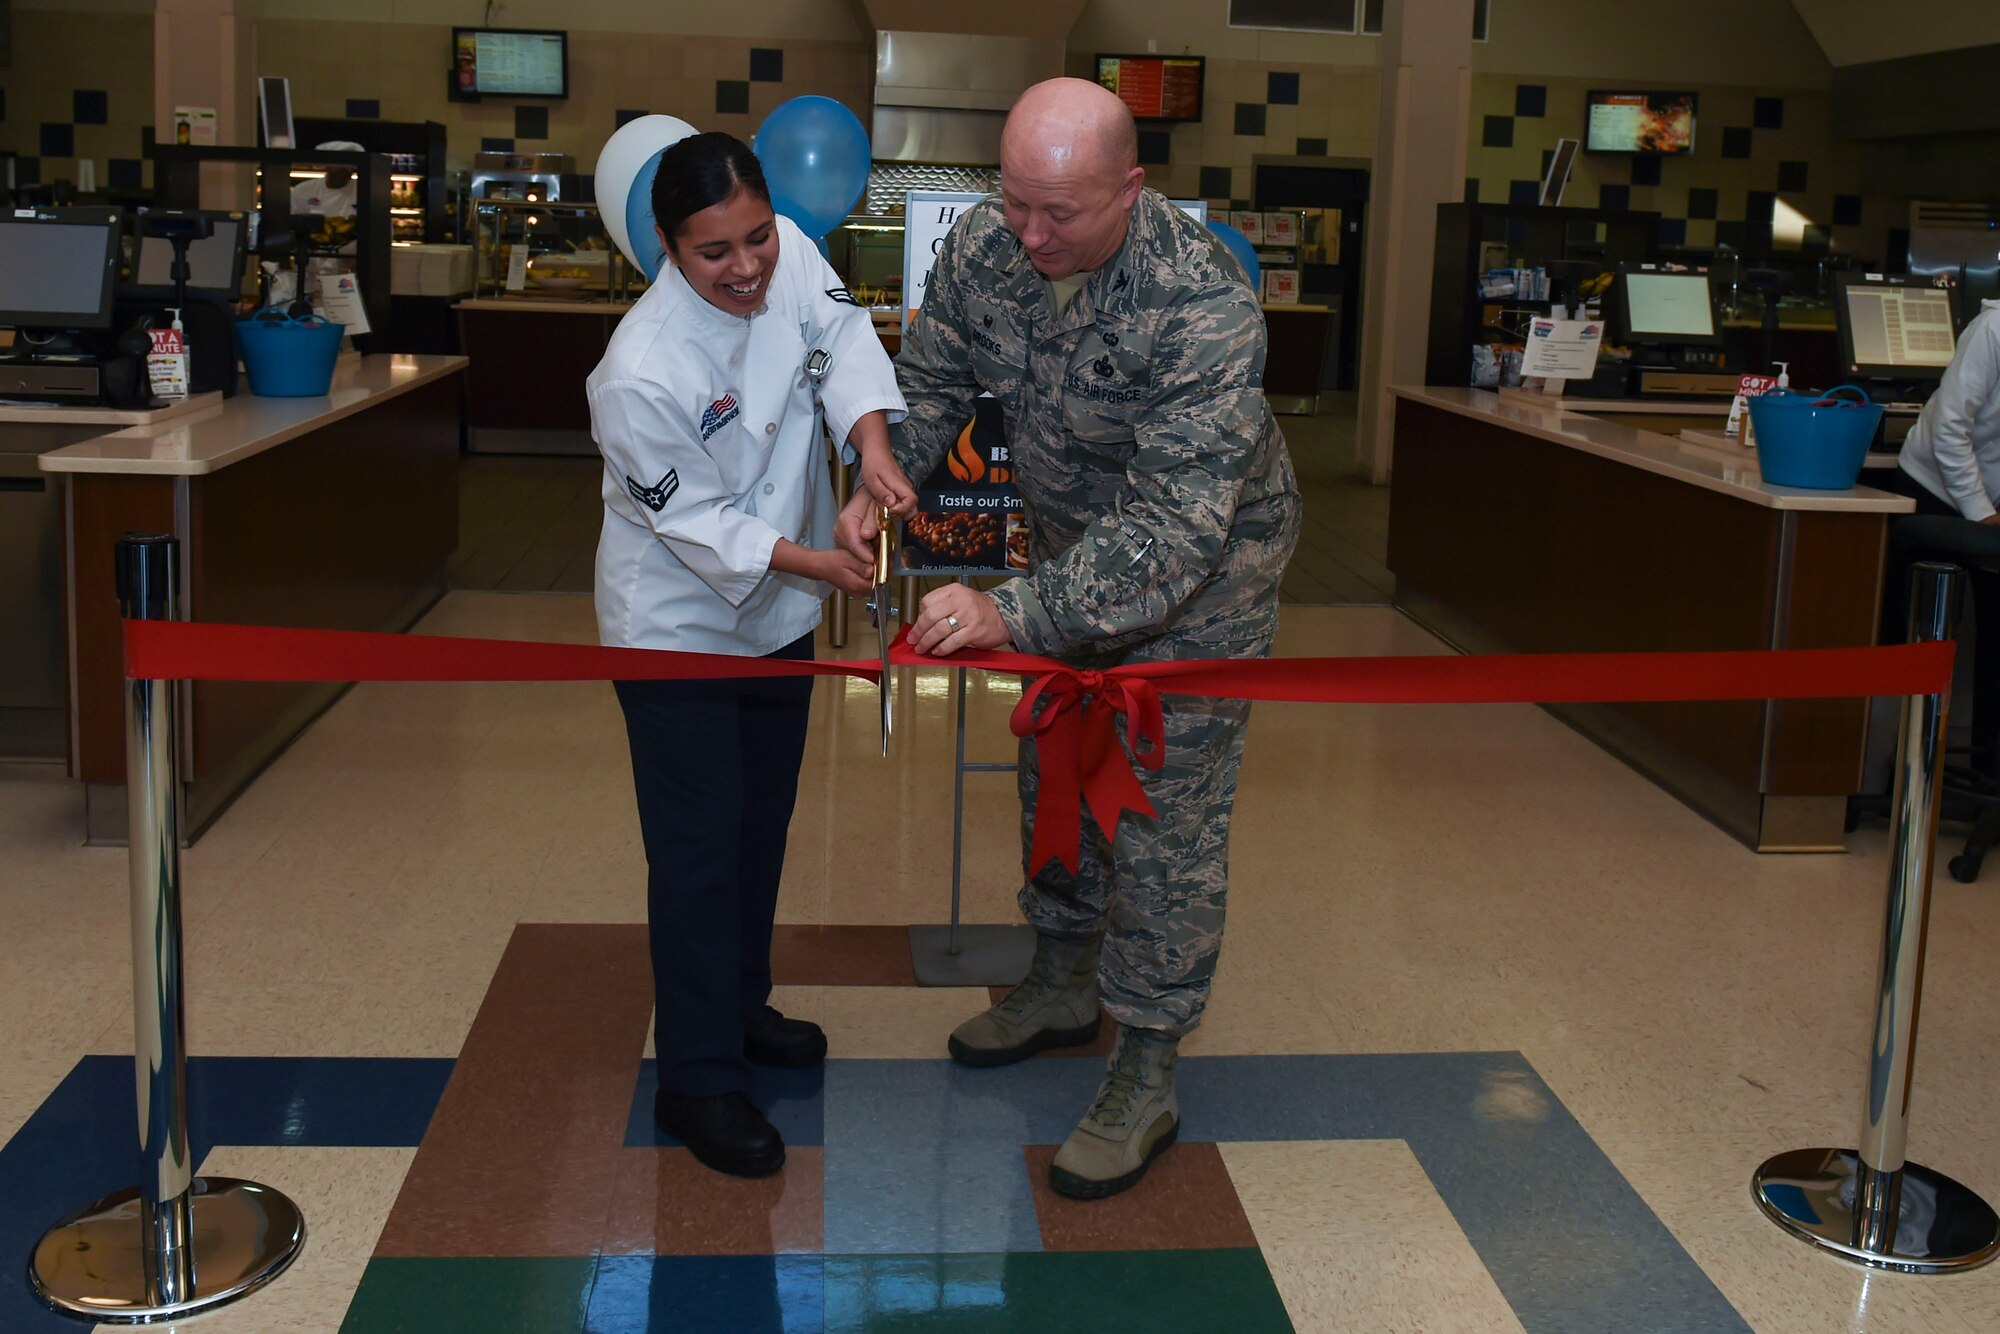 U.S. Air Force Col. William Brooks, 19th Mission Support Group commander, and Airman 1st Class Grethel Rodgers, 19th Force Support Squadron services apprentice, cut the grand re-opening ceremony ribbon Jan. 23, 2017, at the Hercules Dining Facility on Little Rock Air Force Base, Ark. The Hercules Dining Facility upgraded three sections to include the deli, pizza zone and grill. (U.S. Air Force photo by Staff Sgt. Kaylee Clark) 